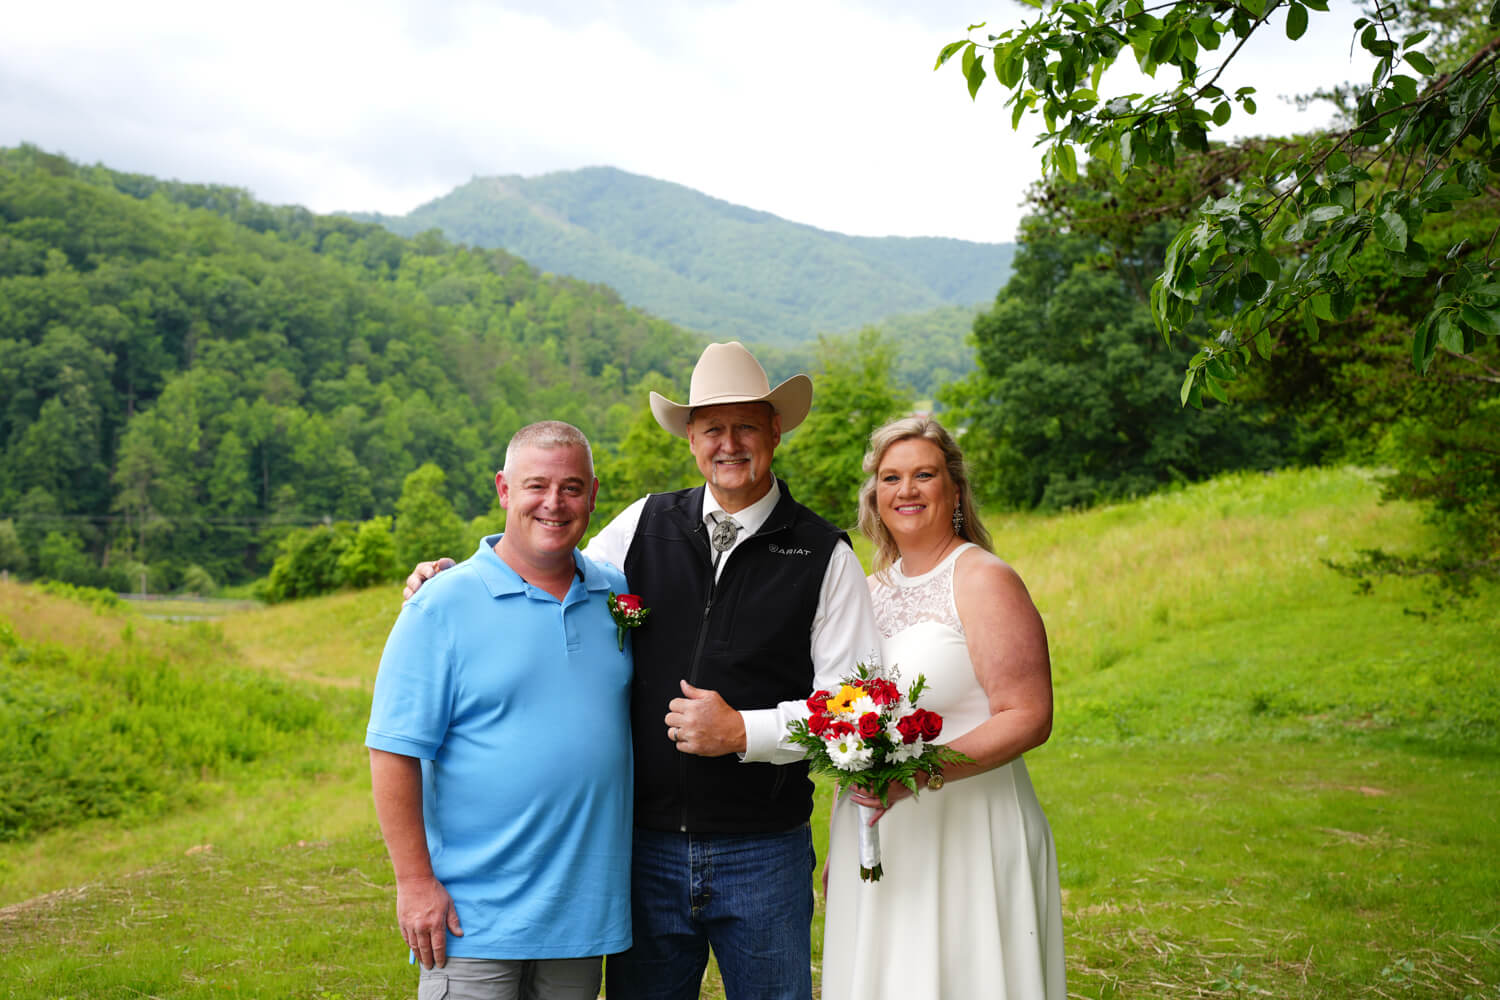 Pastor Lloyd with a couple he just married at the mountain view site at Honeysuckle Hills in Pigeon Forge